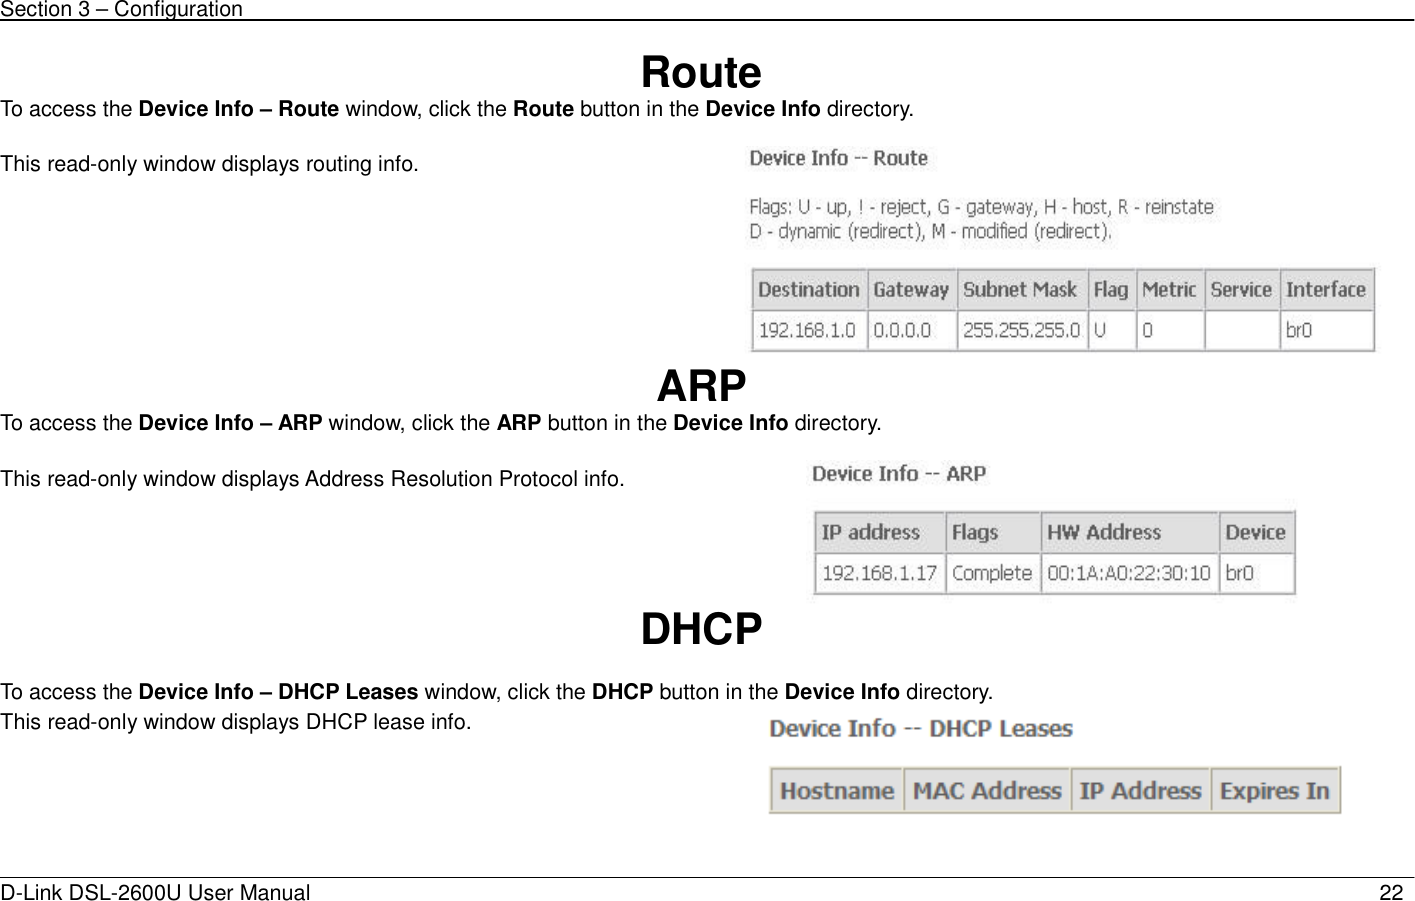 Section 3 – Configuration   D-Link DSL-2600U User Manual                            22Route To access the Device Info – Route window, click the Route button in the Device Info directory.  This read-only window displays routing info.     ARP To access the Device Info – ARP window, click the ARP button in the Device Info directory.  This read-only window displays Address Resolution Protocol info.   DHCP  To access the Device Info – DHCP Leases window, click the DHCP button in the Device Info directory. This read-only window displays DHCP lease info.     